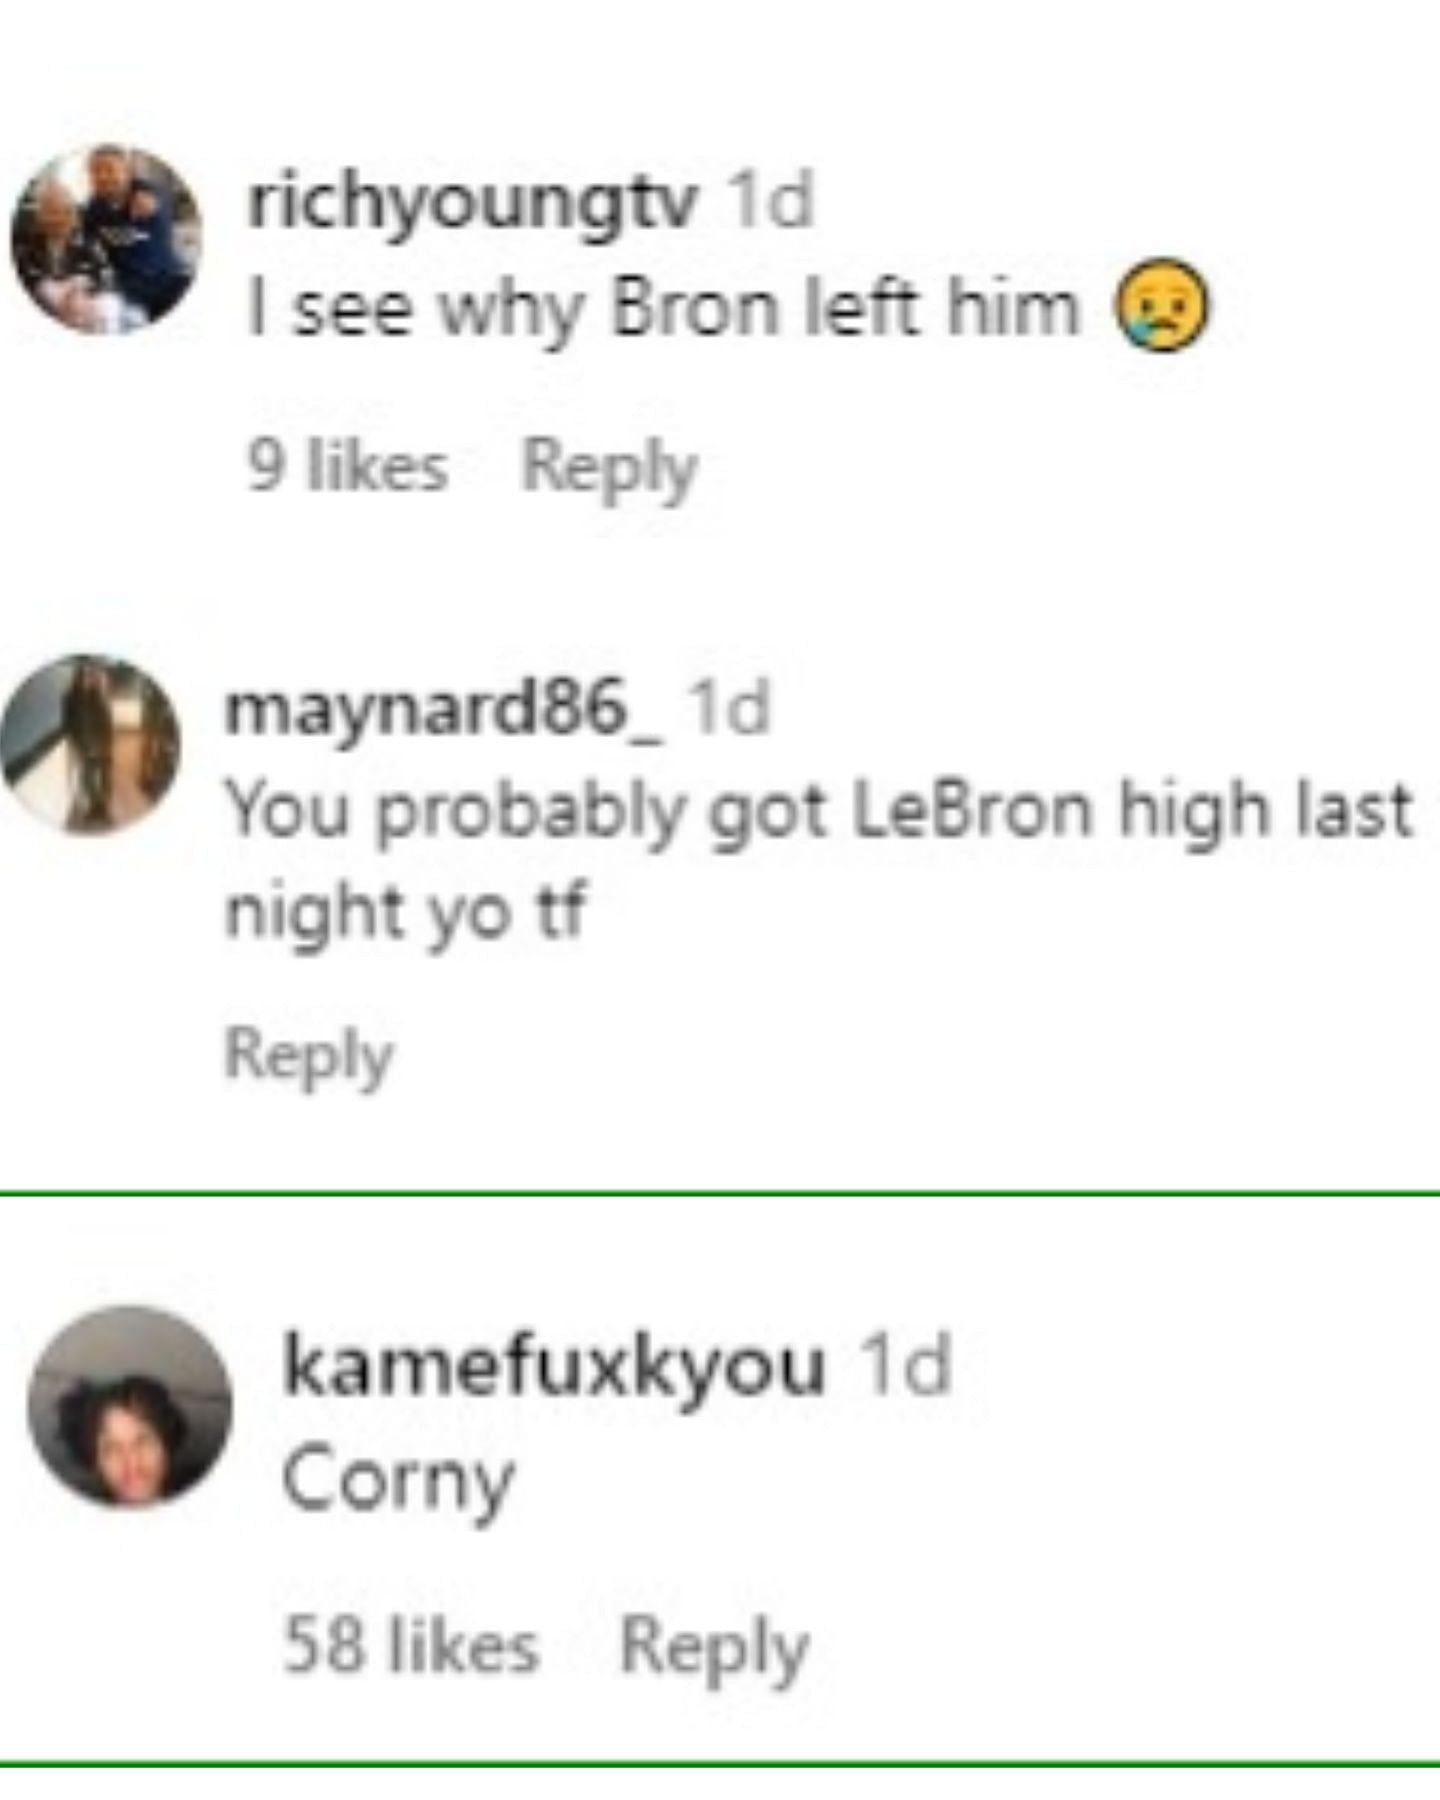 Fans react to Dwyane Wade getting high with Gabrielle Union on 4/20